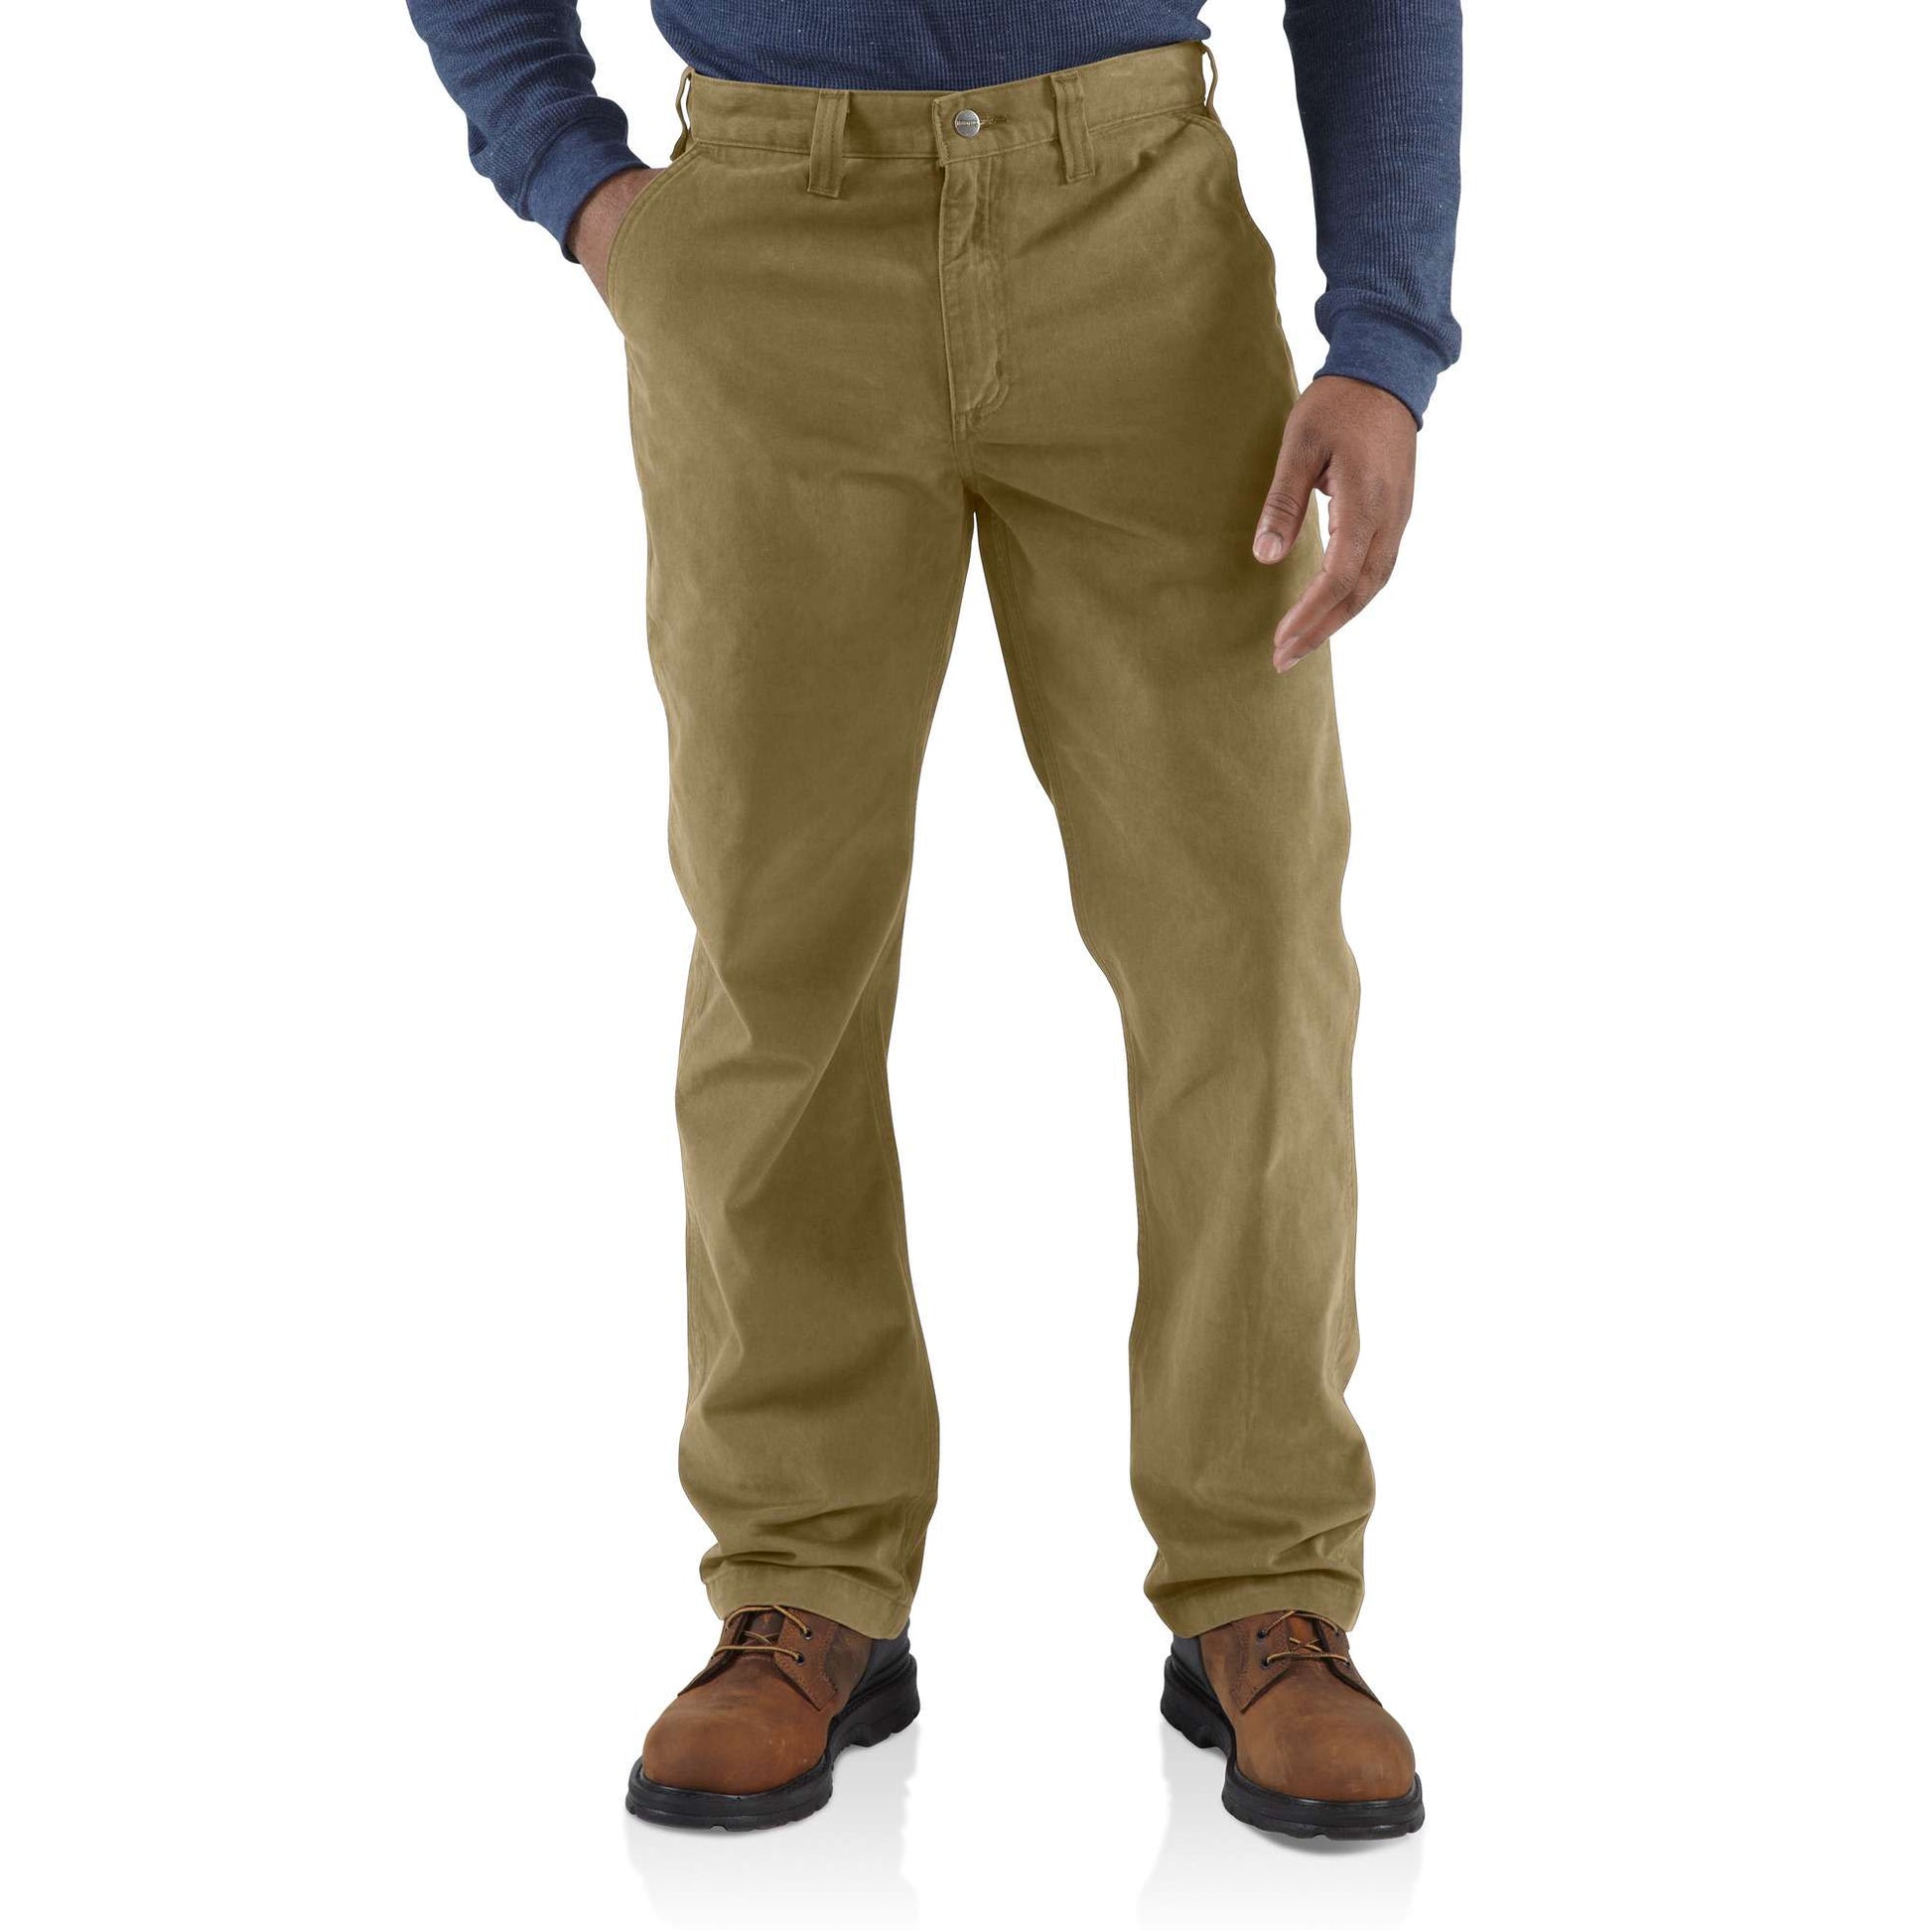 Carhartt Relaxed Fit Twill 5-Pocket Work Pant